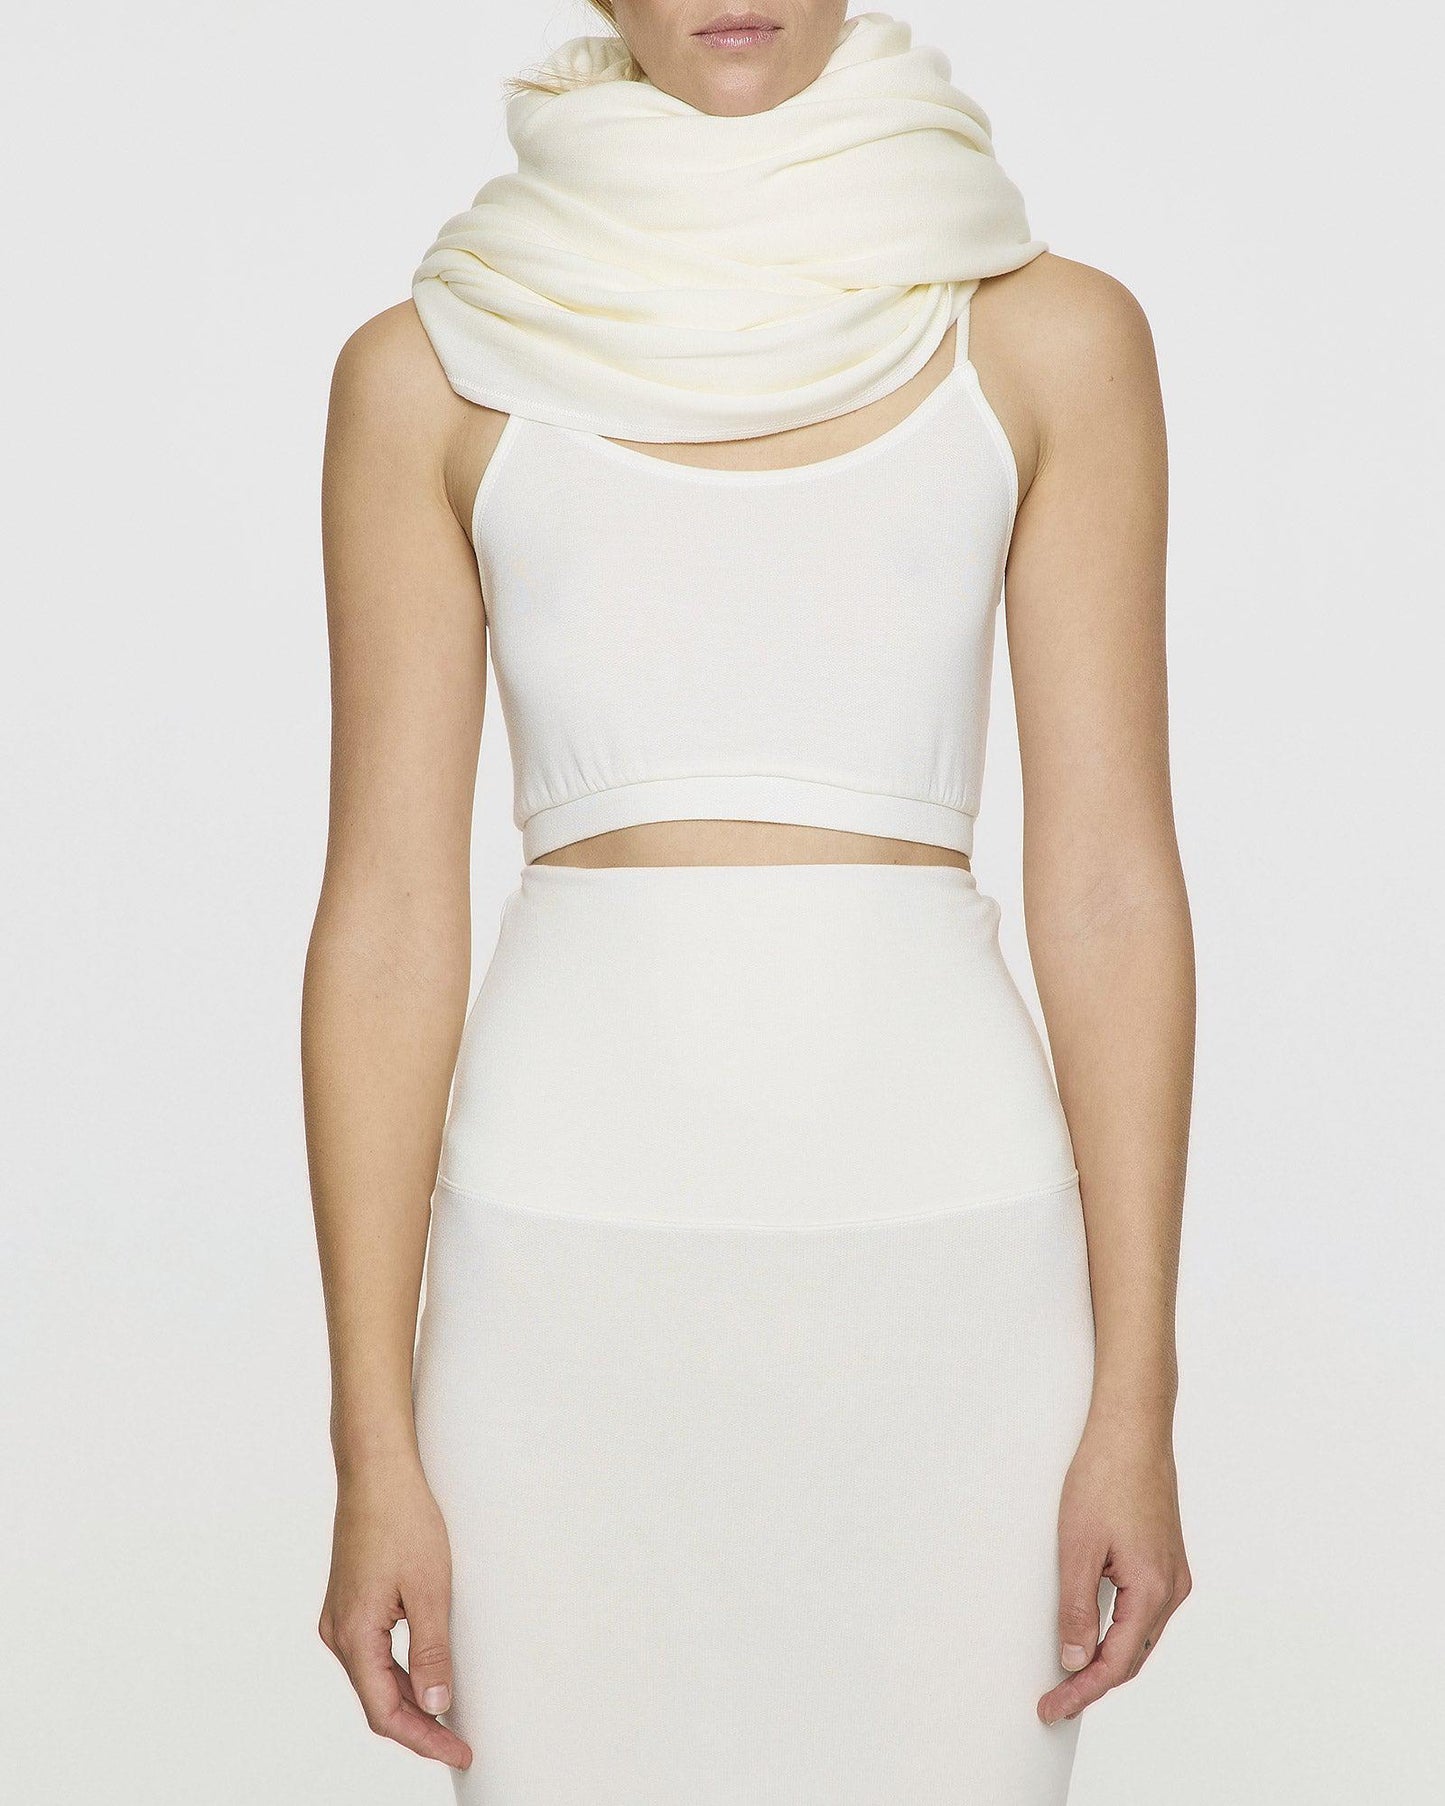 Unbleached | Soft Off-White Neck Wrap Scarf